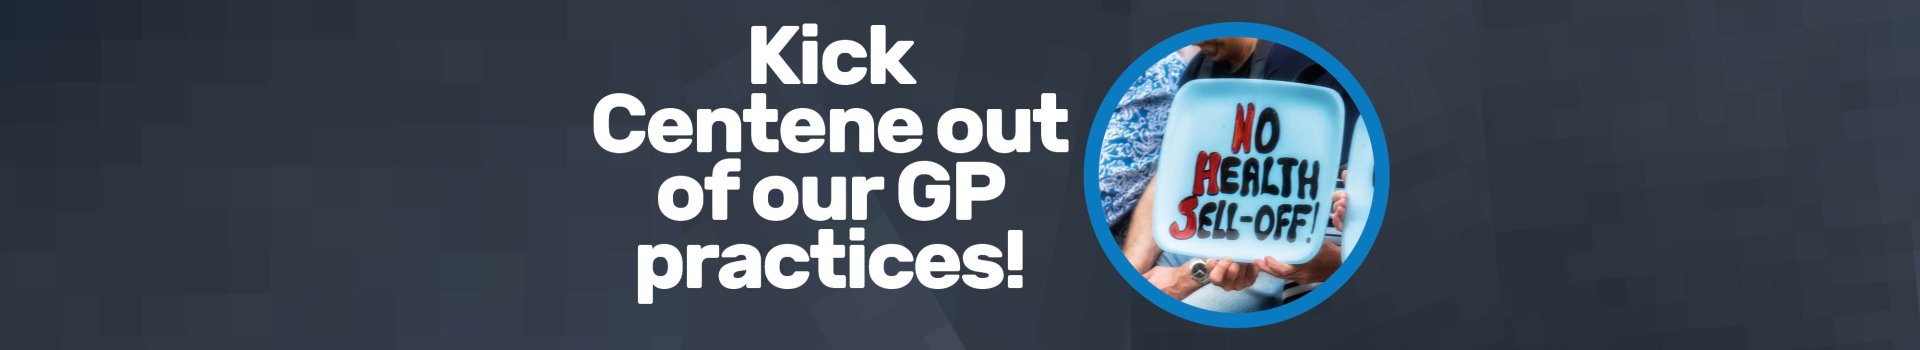 A blue background with text reading "Kick Centene out of our GP practices" and a photo of a protester holding a sign reading "no health sell-off"